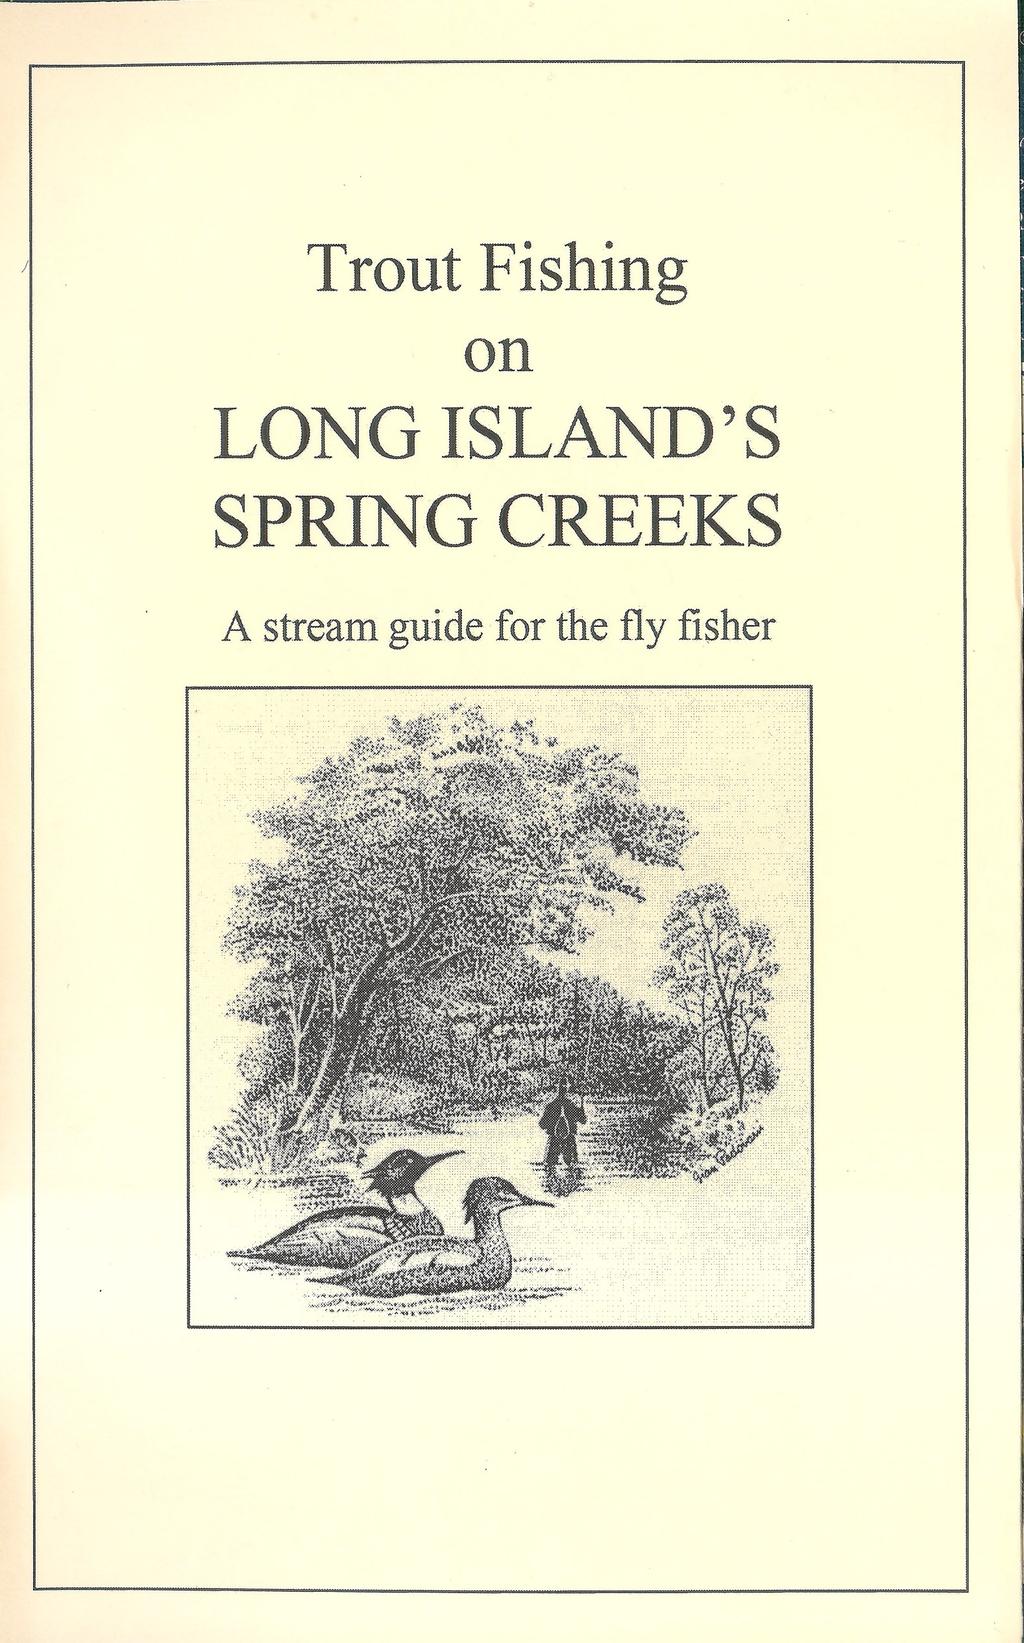 Where to catch Trout on Long Island Long Island Trout Unlimited has been producing a stream guide for our spring creeks for many years.